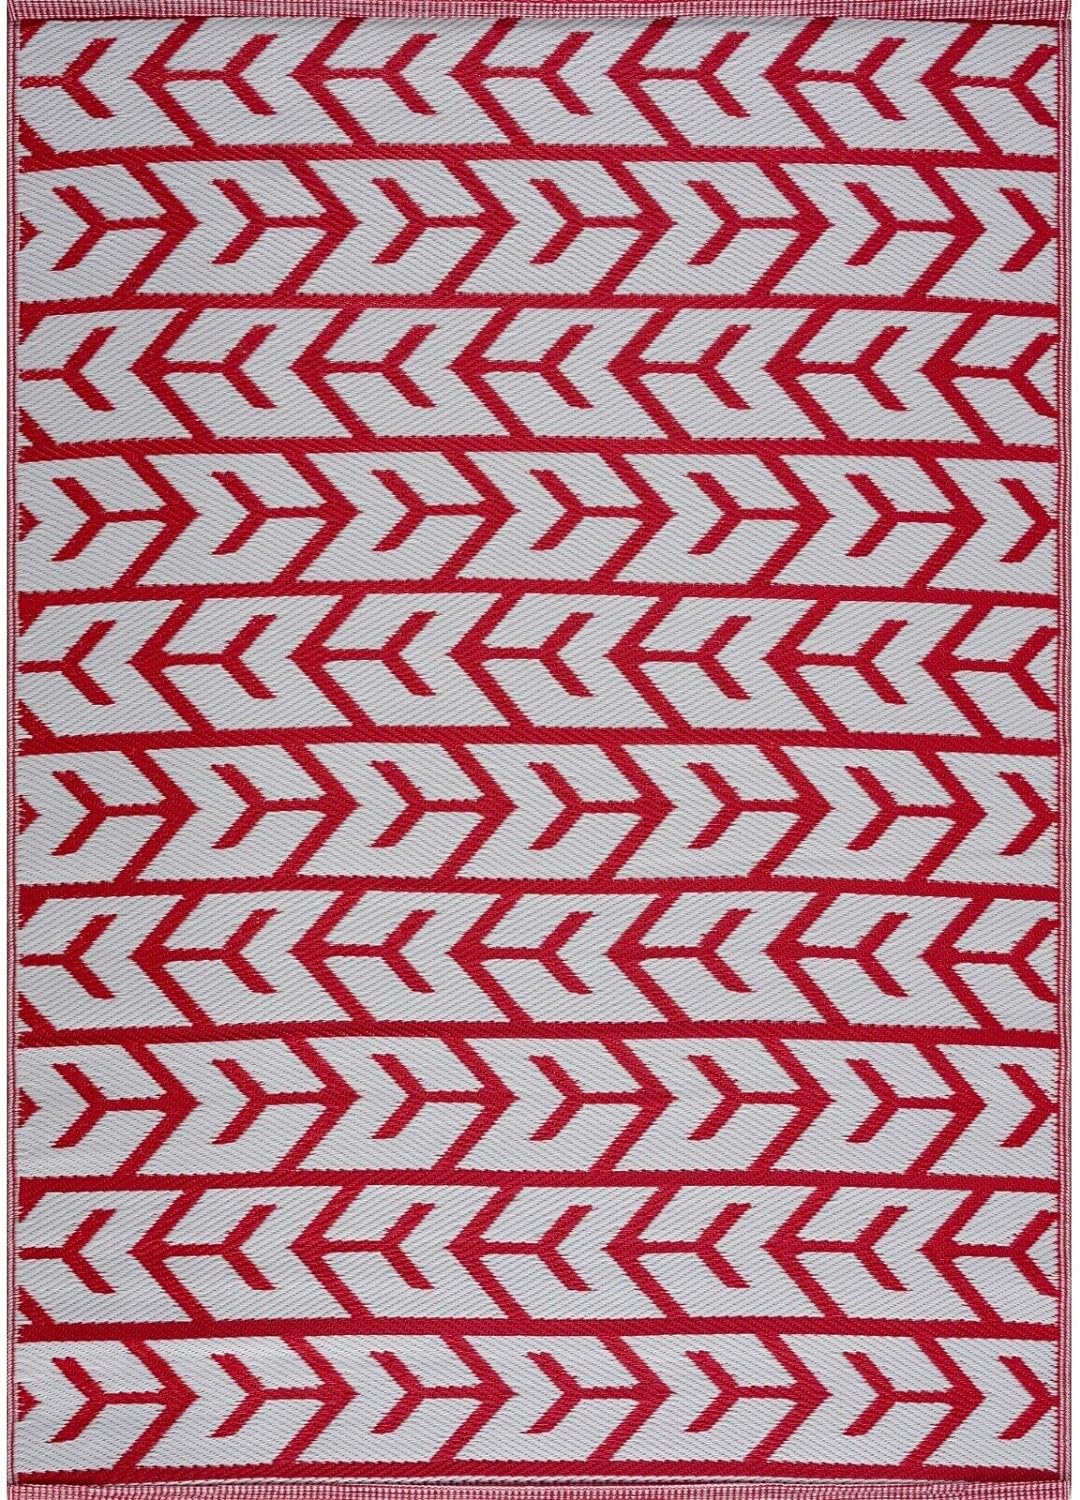 Playa Outdoor Rug - Crease-Free Recycled Plastic Floor Mat for Patio, Camping, Beach, Balcony, Porch, Deck - Weather, Water, Stain, Lightweight, Fade and UV Resistant - Amsterdam- Red & White